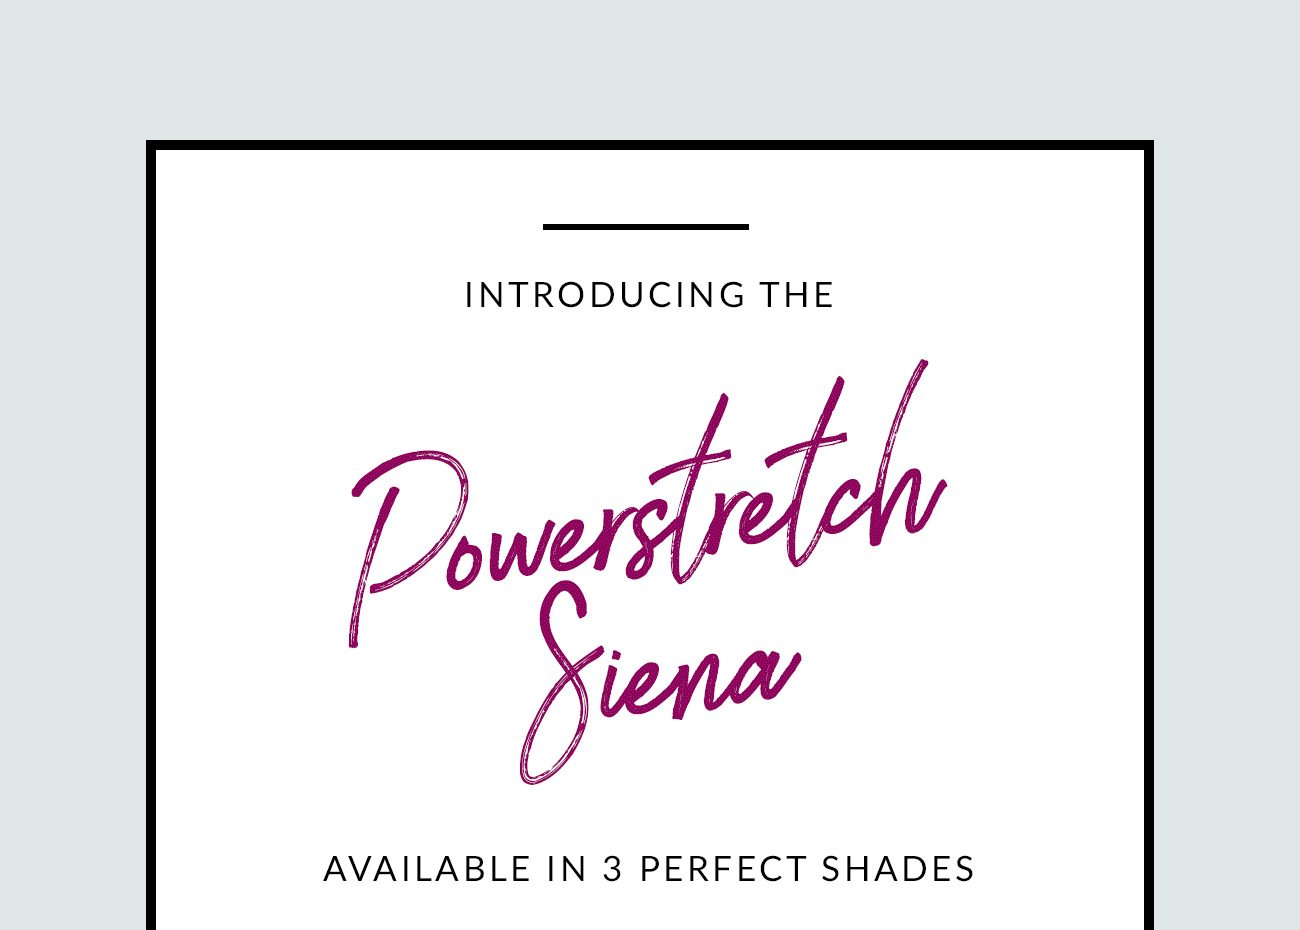 Introducing the Powestretch Siena